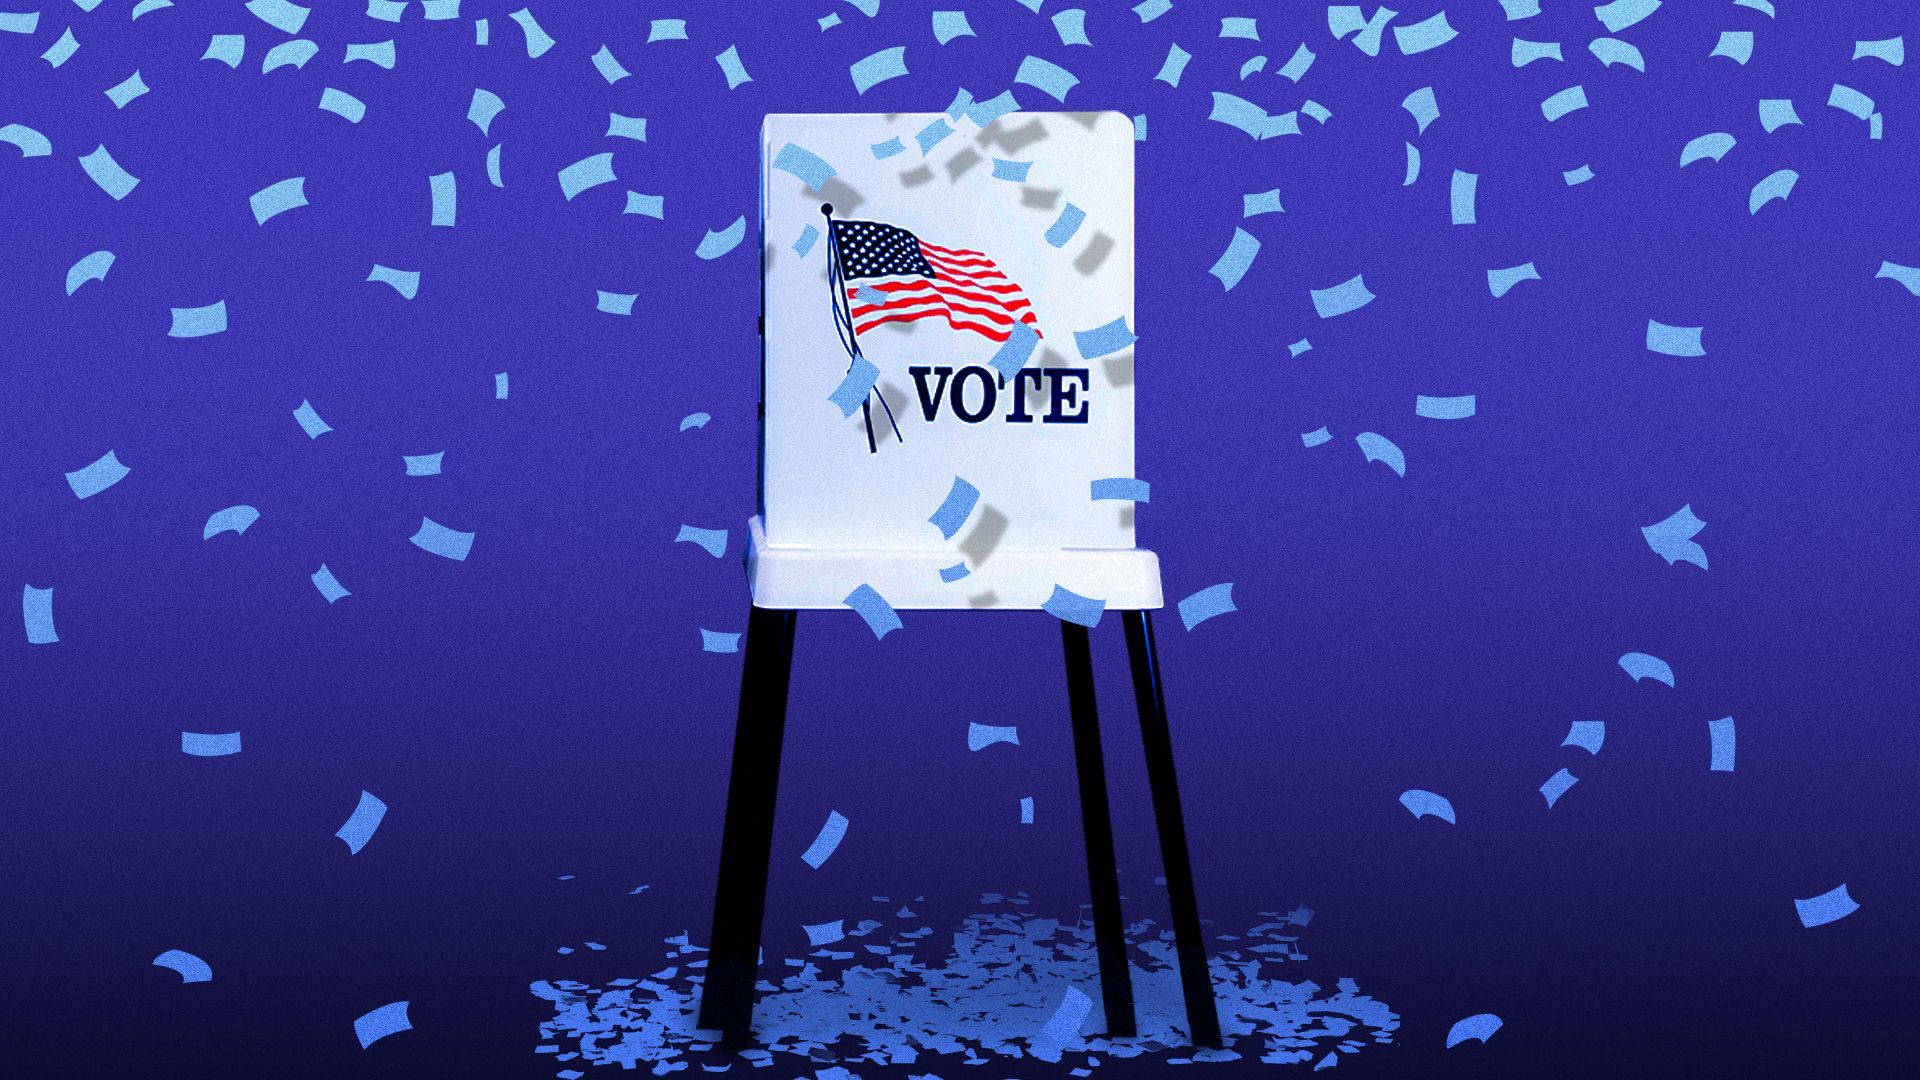 Illustration of confetti falling on a voting booth.